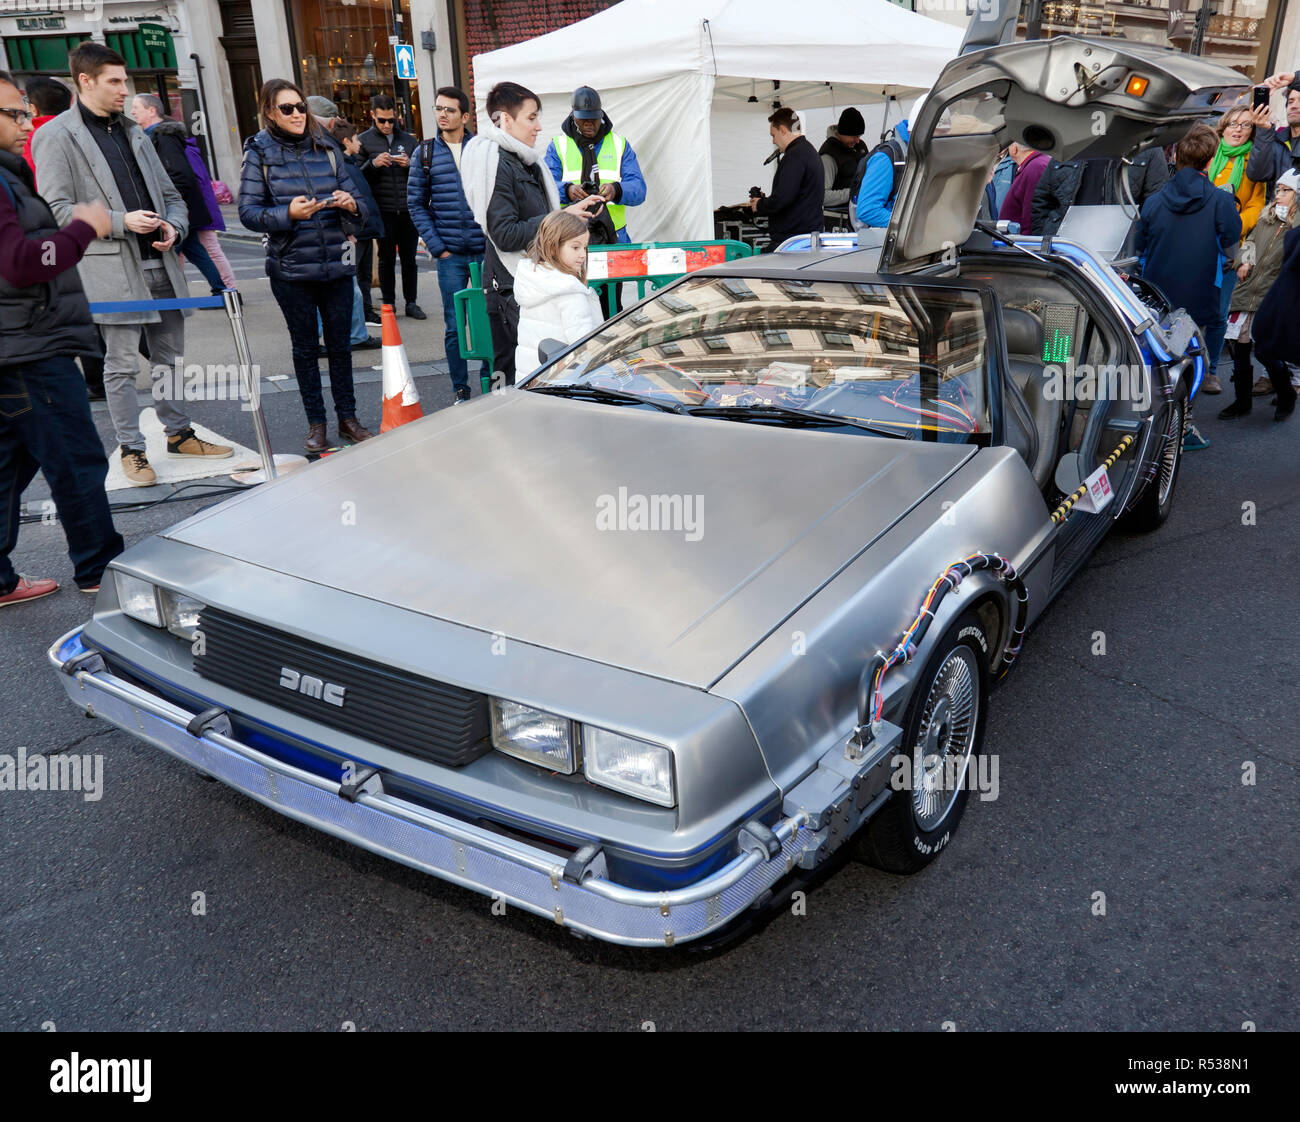 Three-quarter front  view of the DeLorean time machine  from the Back to the Future films, on display at the 2018 Regents Street Motor Show Stock Photo